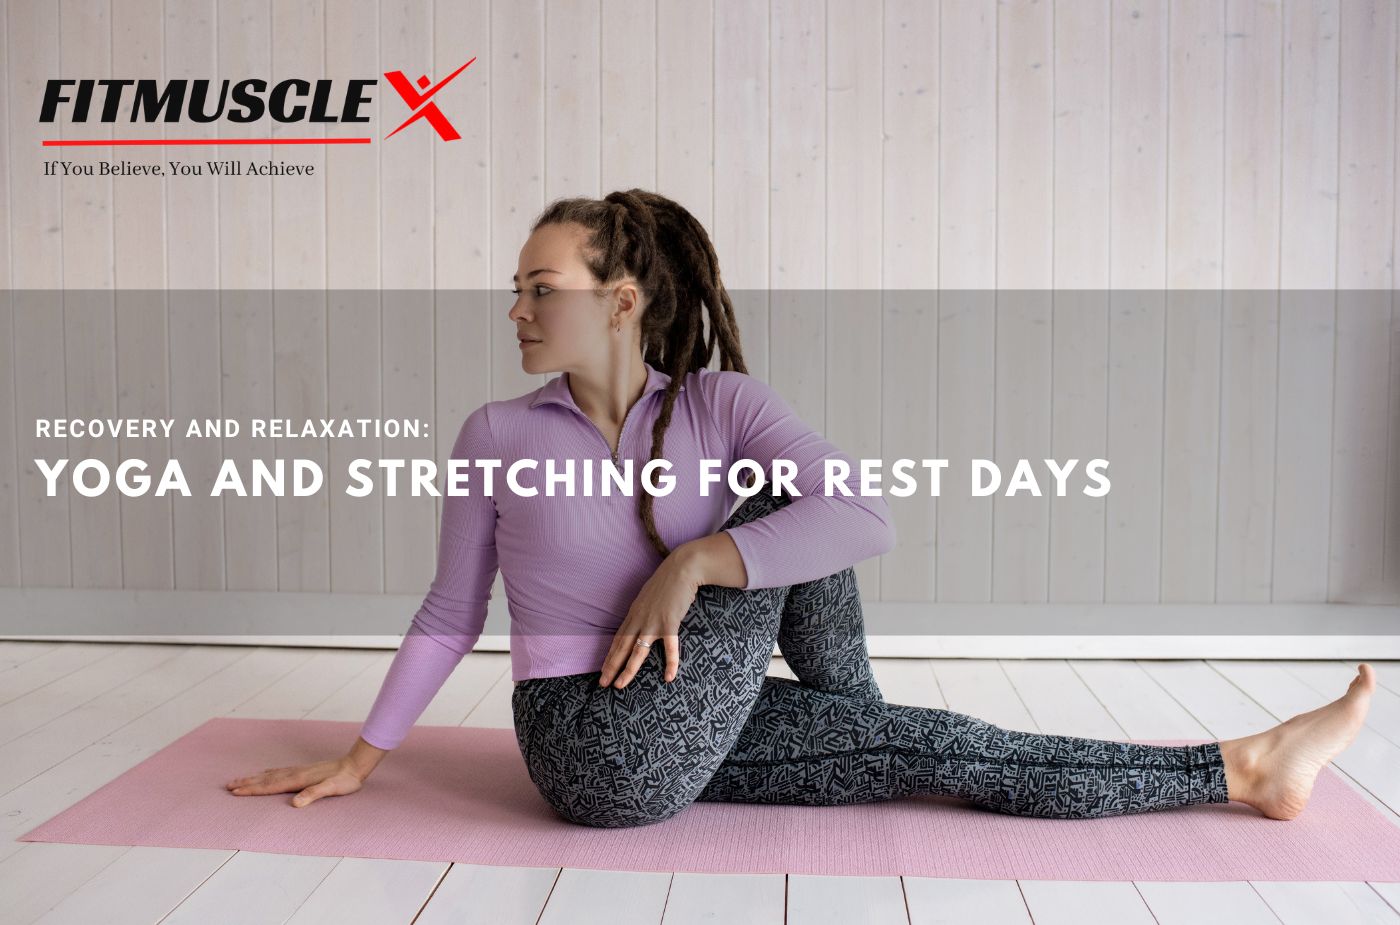 Stretching and Yoga for Recuperation and Relaxation on Rest Days